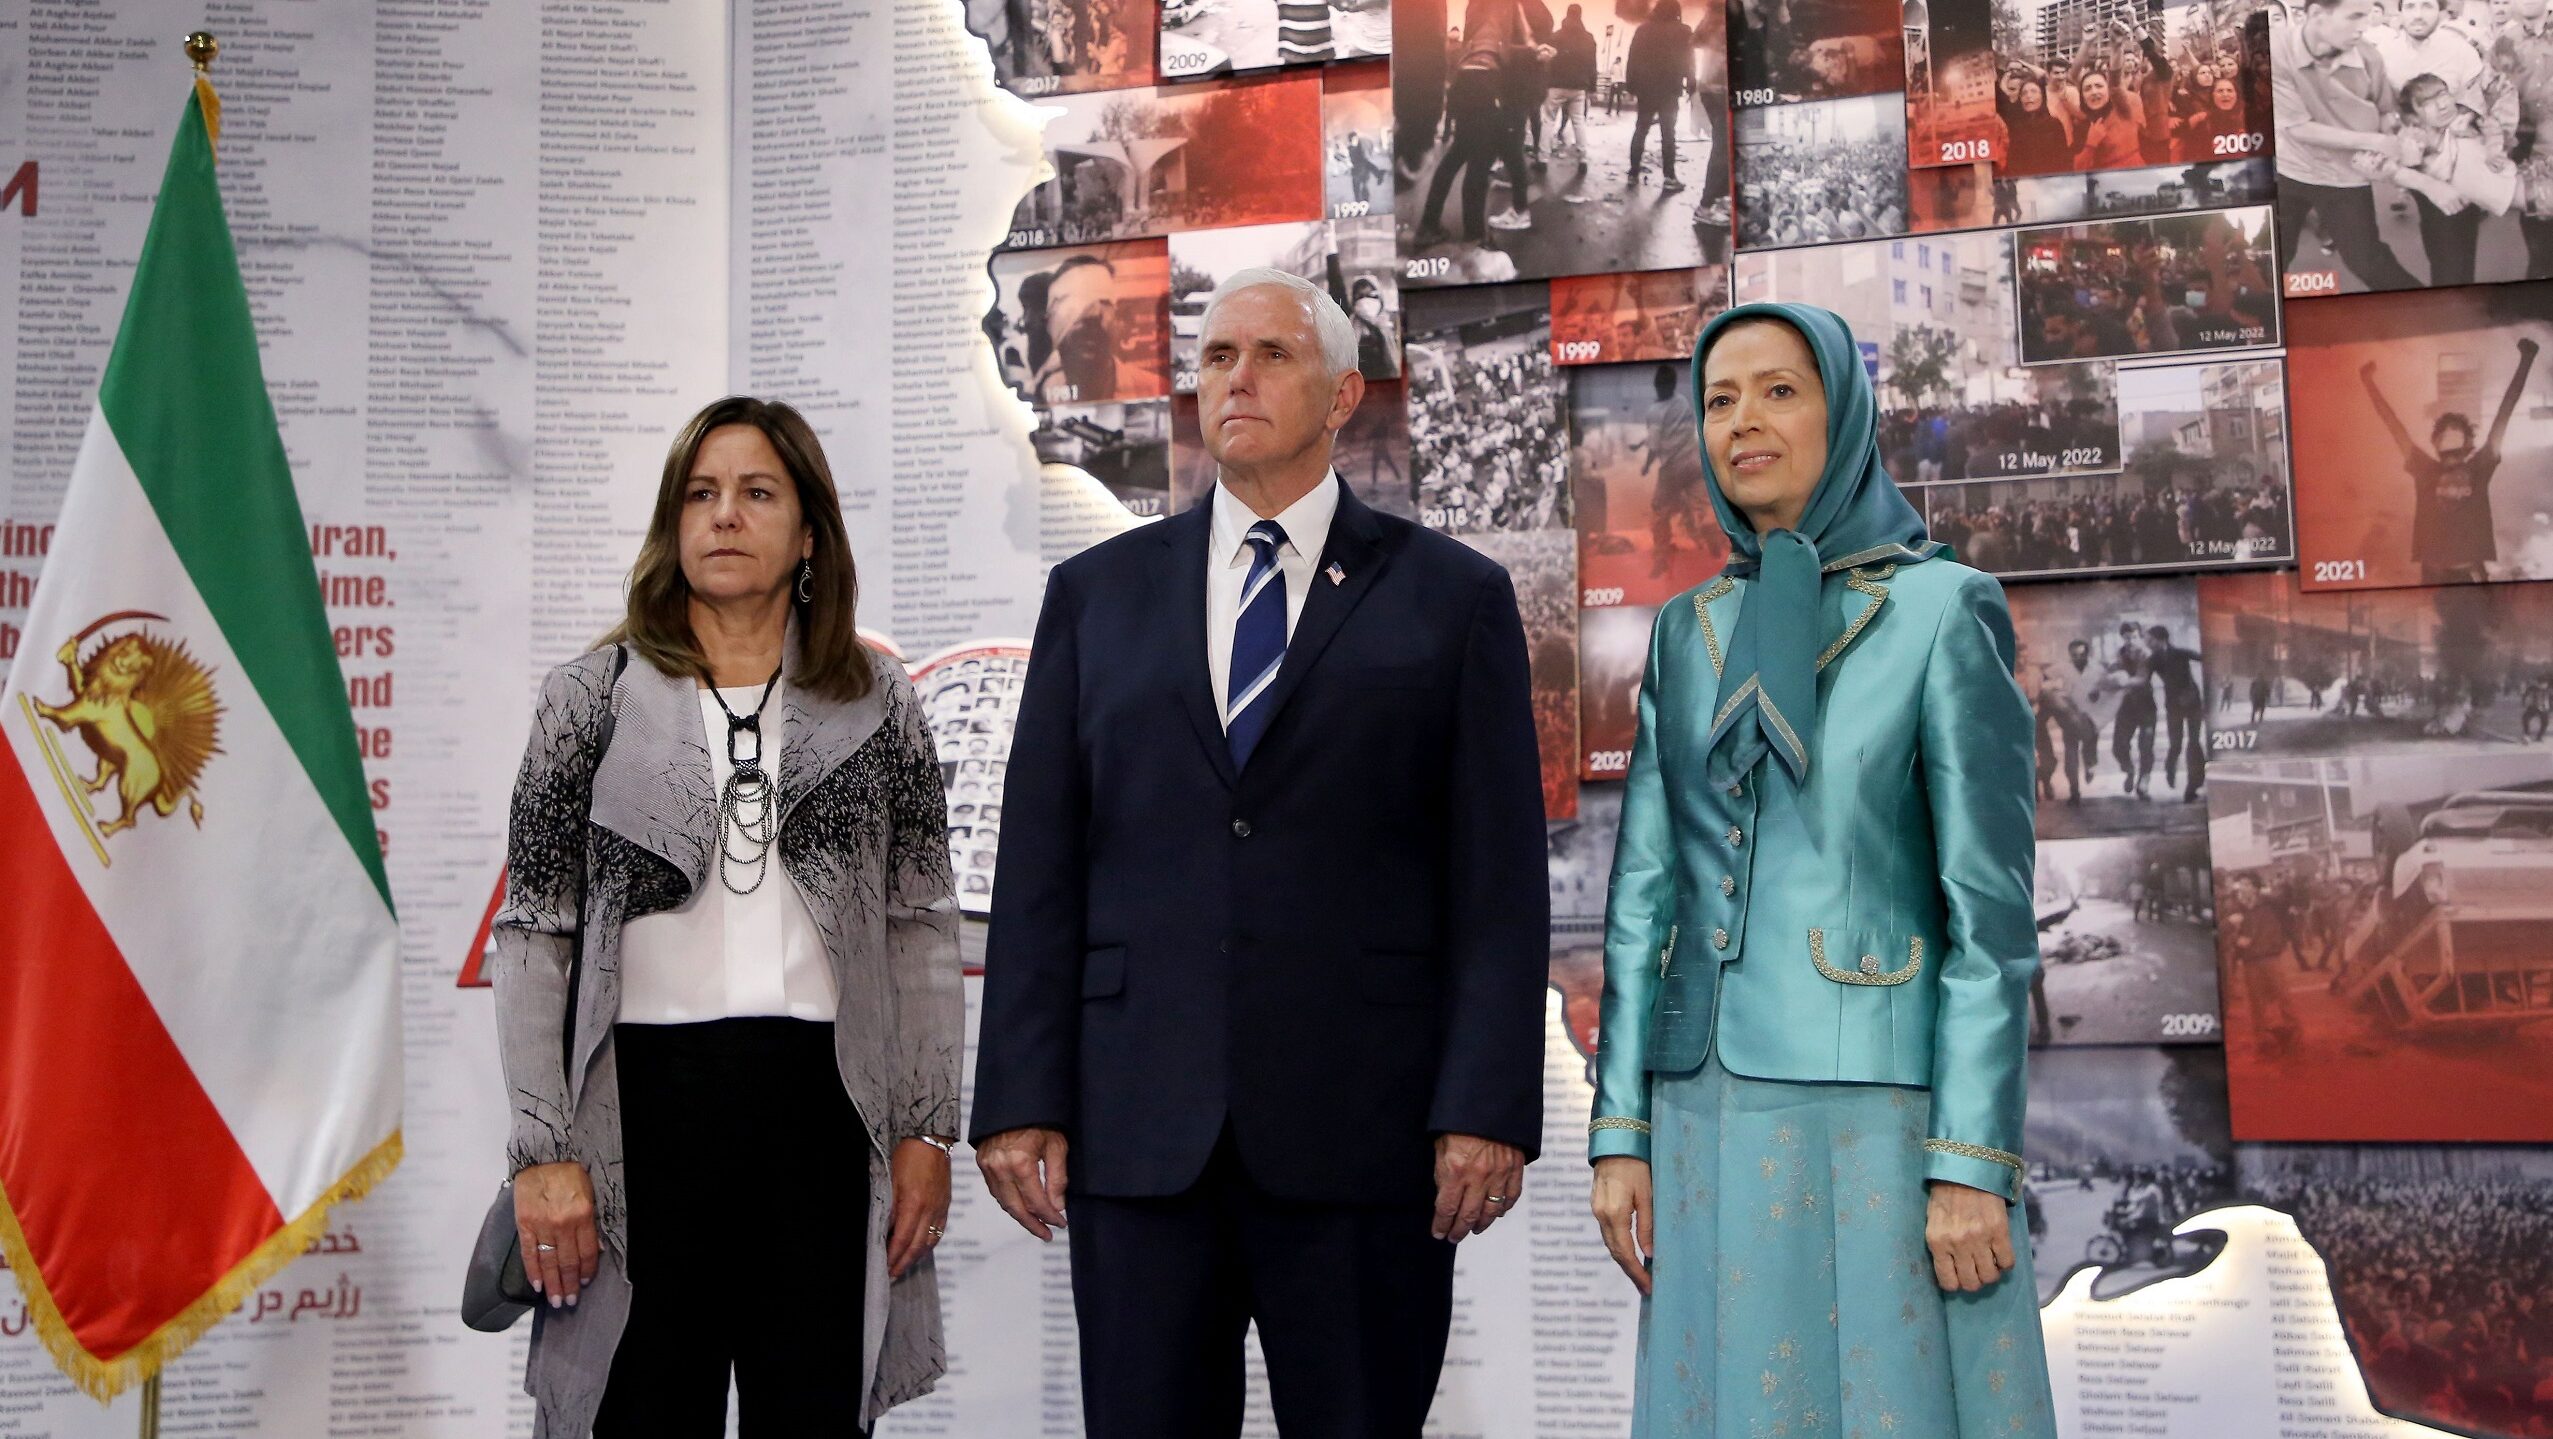 Mike Pence, Liz Truss Support Exiled Iranian Opposition Group at Paris Rally